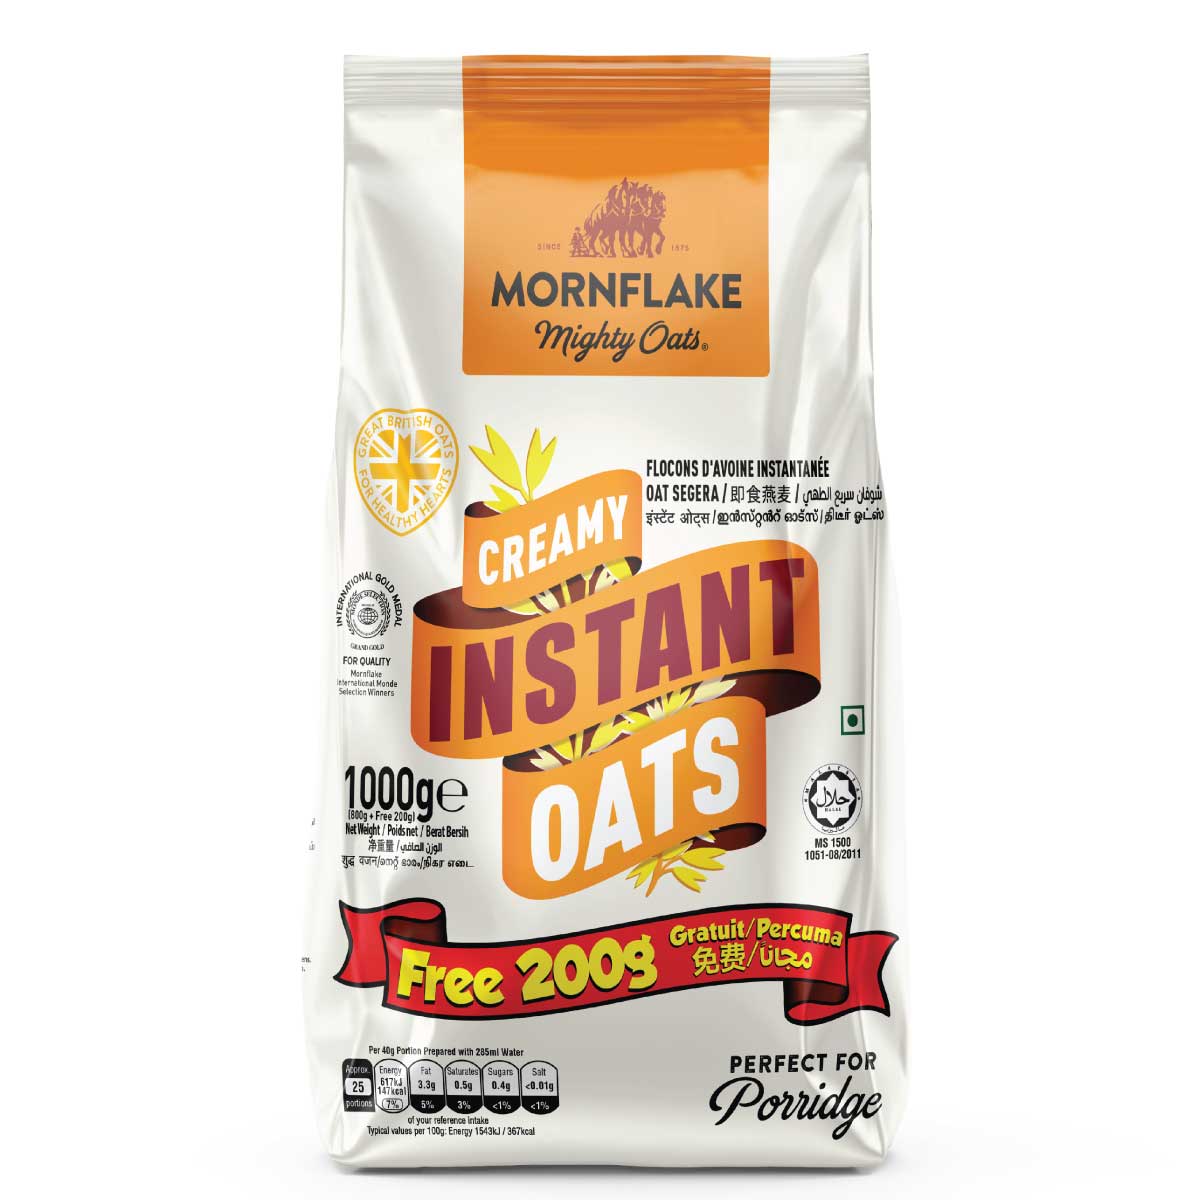 Mornflake Creamy Instant Oats (800g FREE 200g)